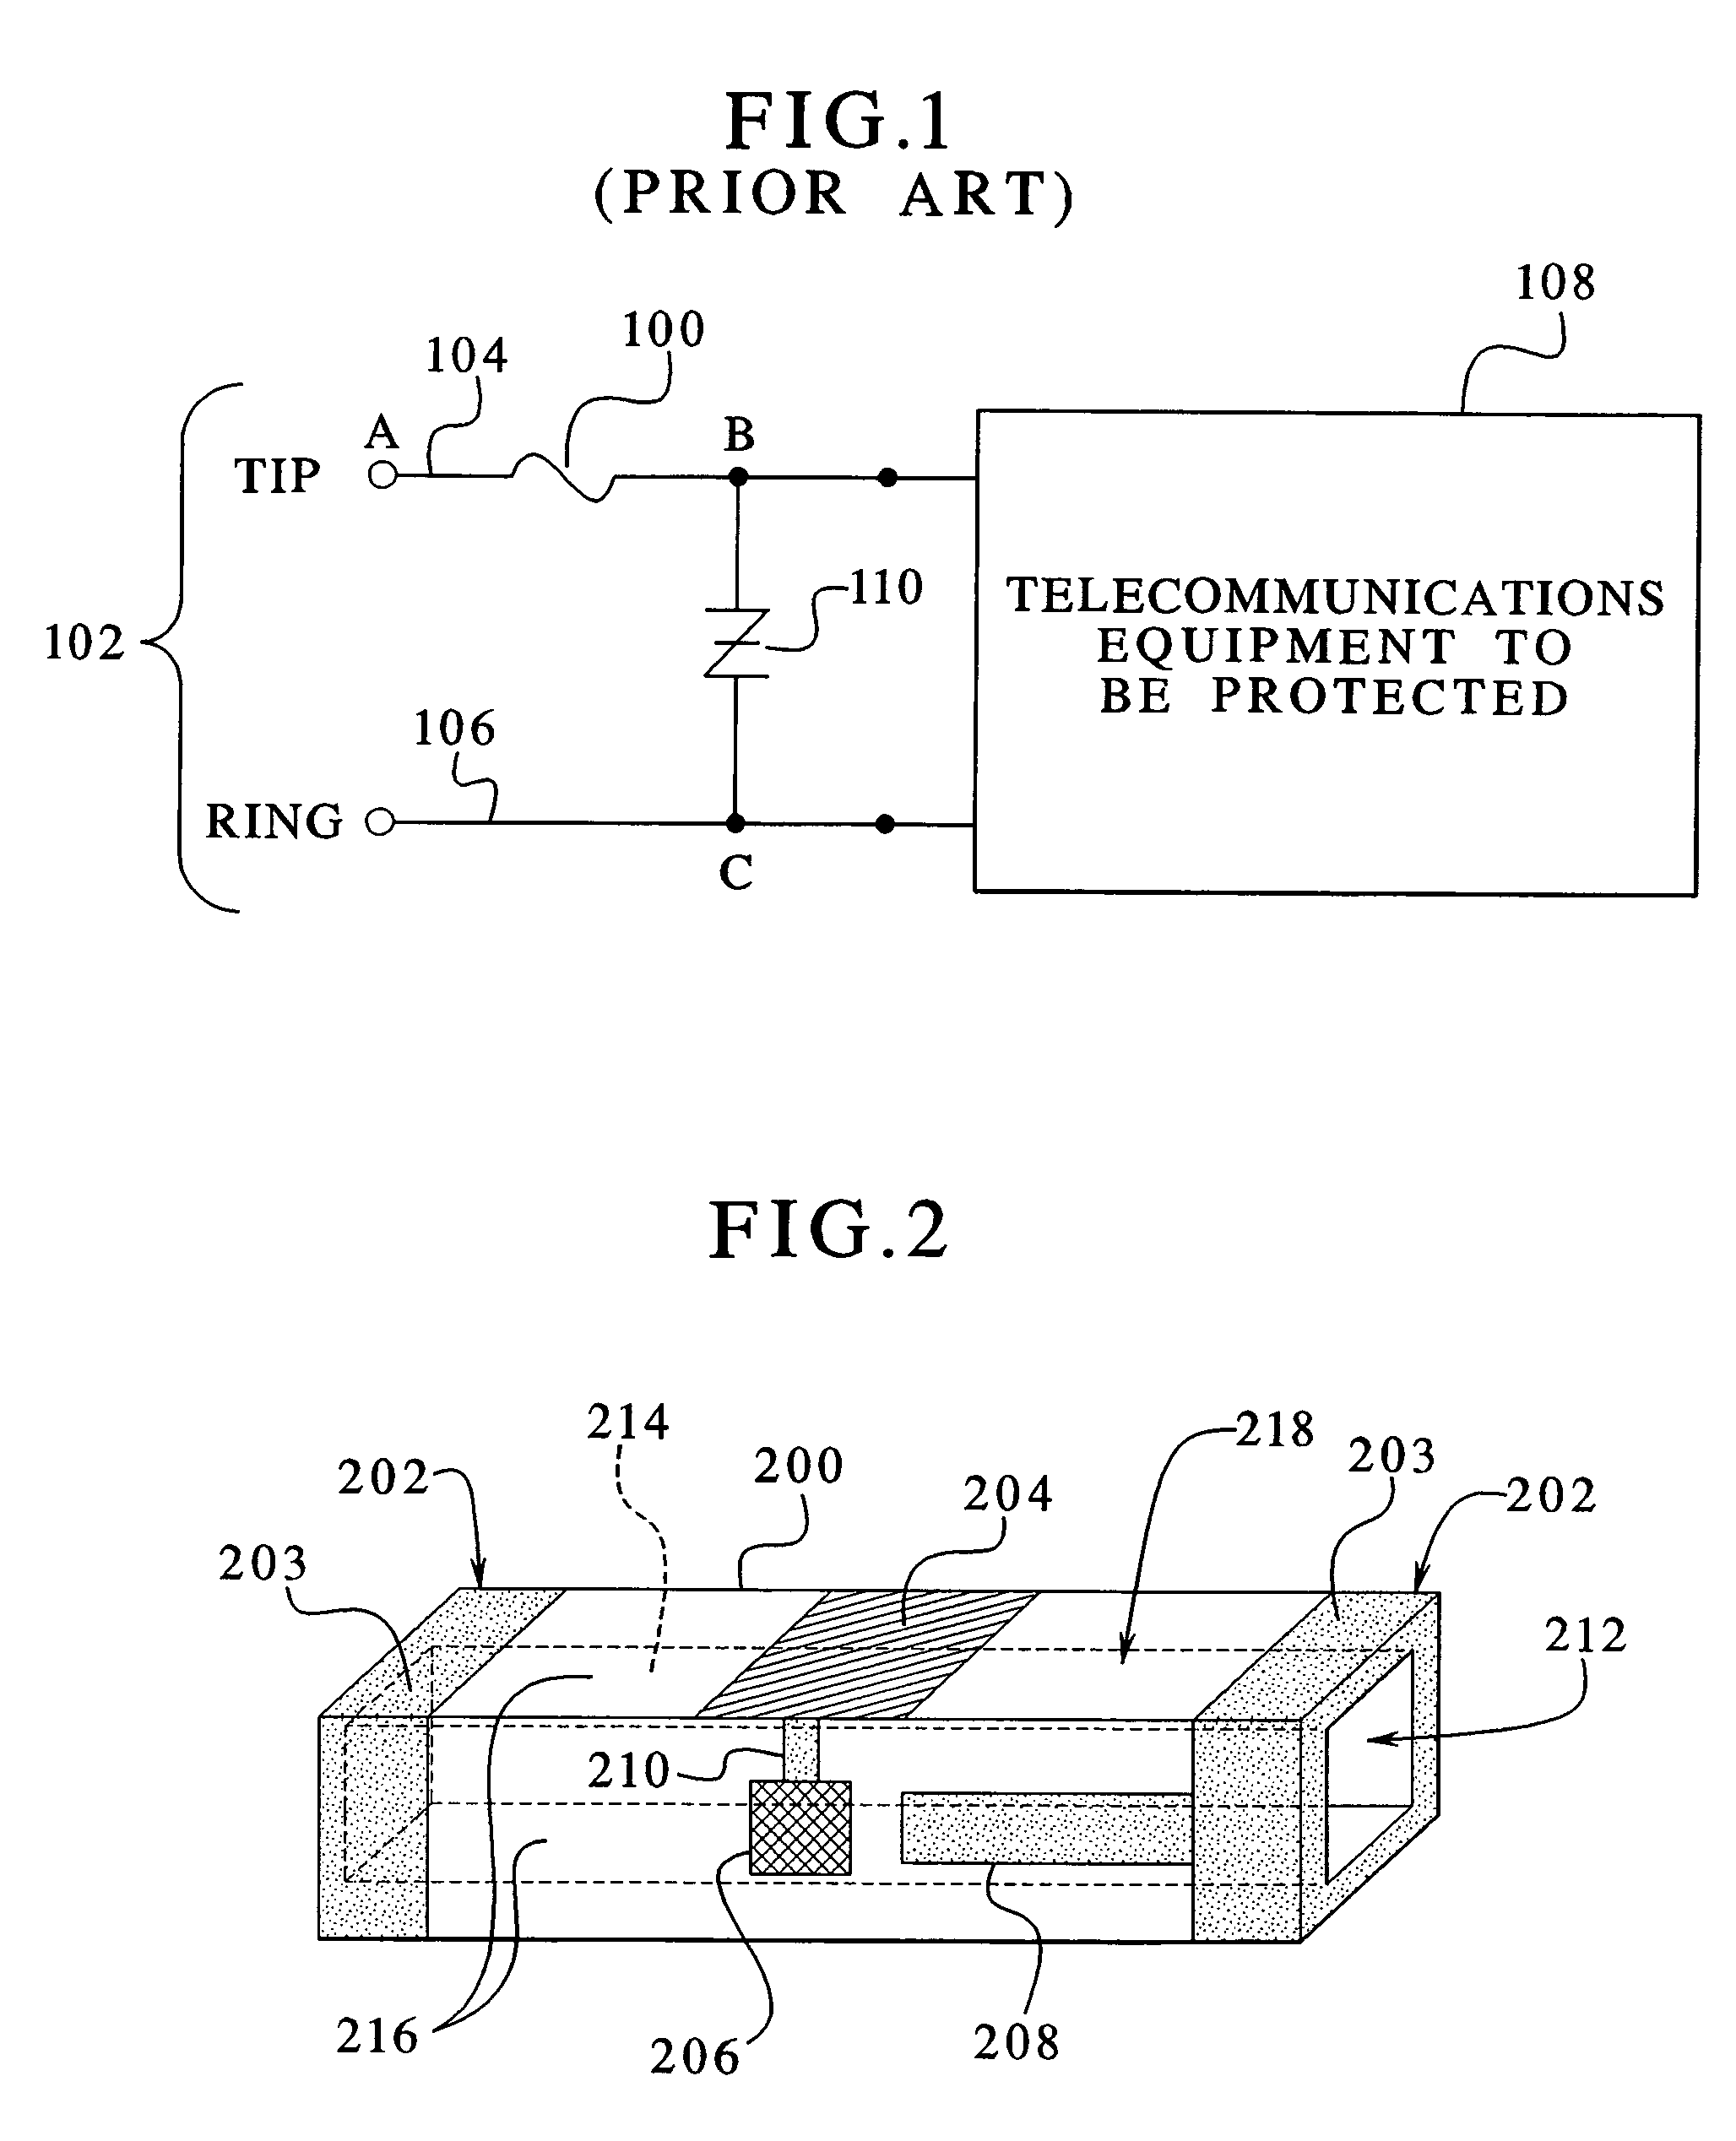 Integrated overcurrent and overvoltage apparatus for use in the protection of telecommunication circuits